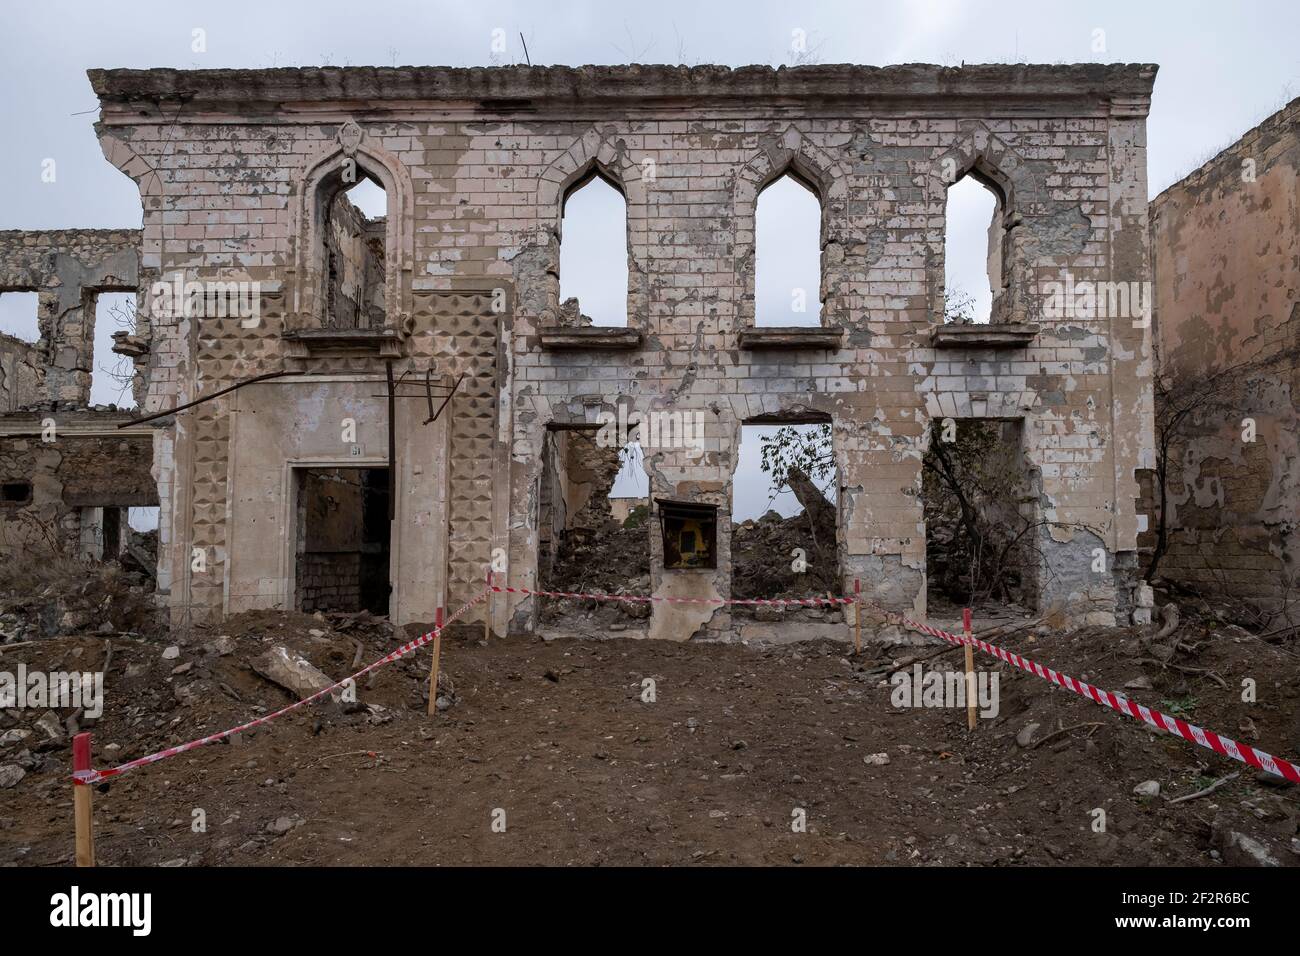 AGDAM, AZERBAIJAN - DECEMBER 14: Ruins of the culture center in the town of Agdam which was destroyed by Armenian forces during the First Nagorno-Karabakh War on December 14, 2020 in Agdam, Azerbaijan. The town and its surrounding district were returned to Azerbaijani control as part of an agreement that ended the 2020 Nagorno-Karabakh War. Stock Photo